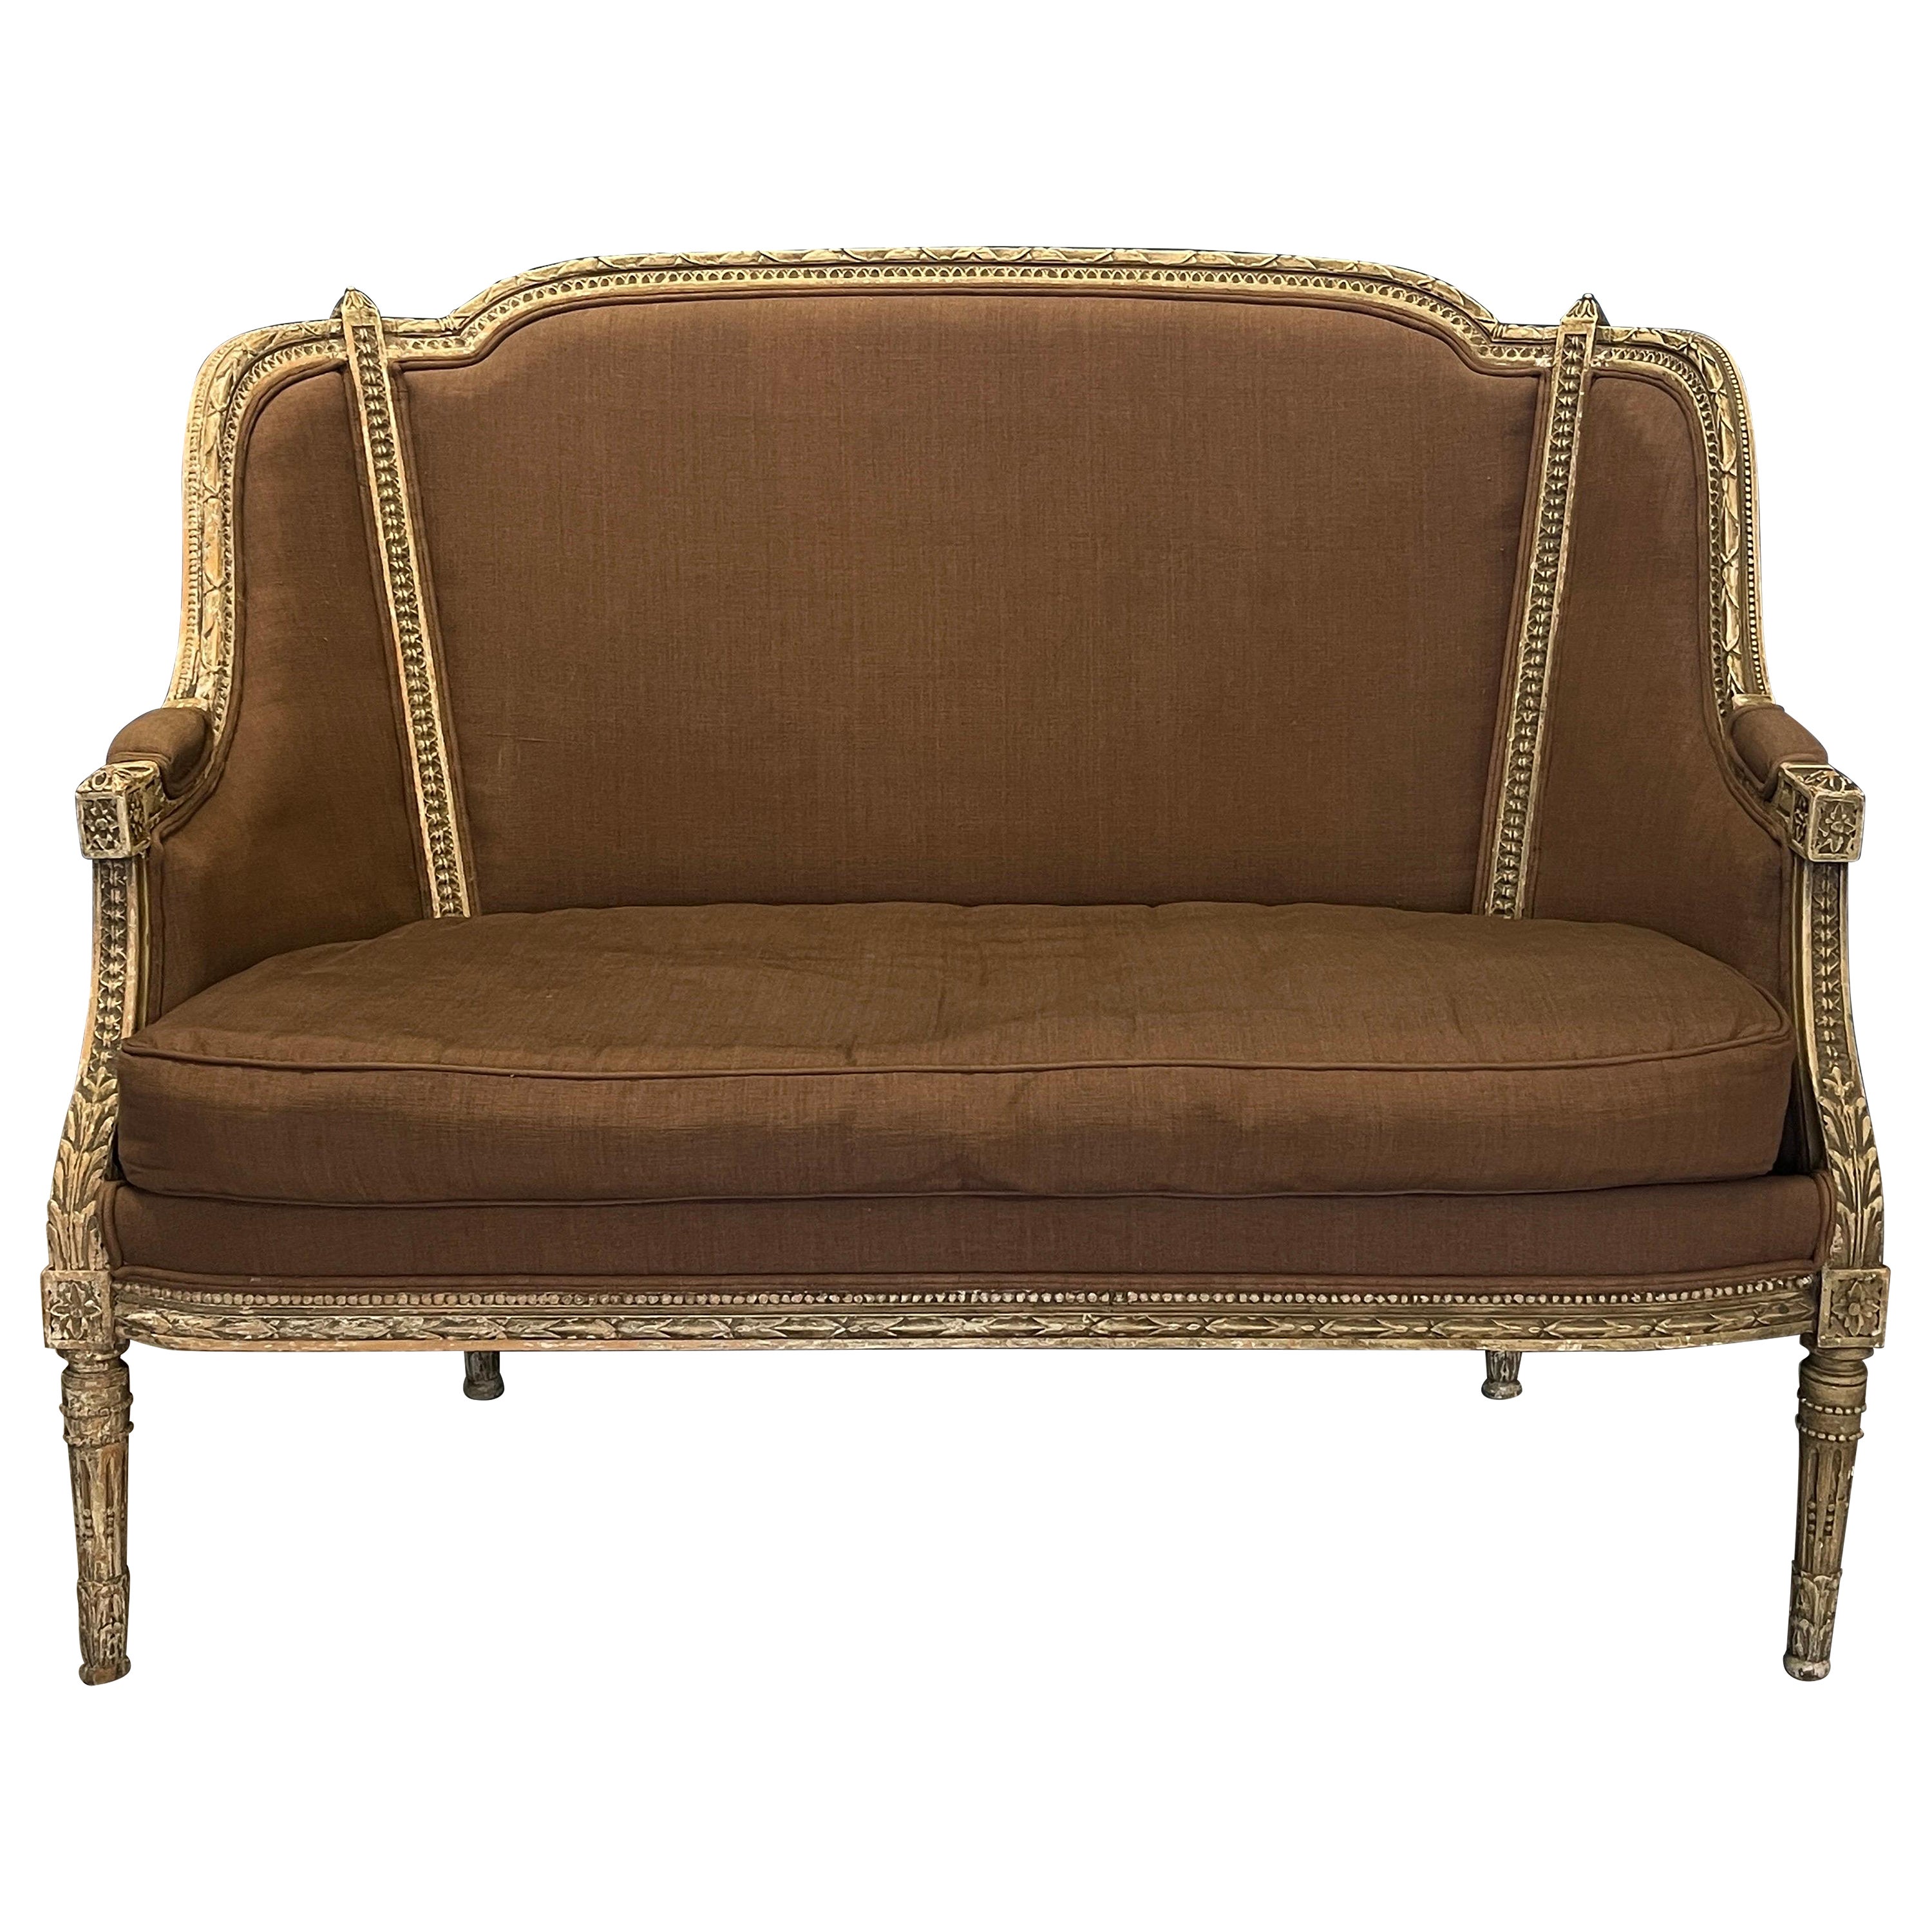 French Gilt Wood Louis XVI Settee - 1870 For Sale